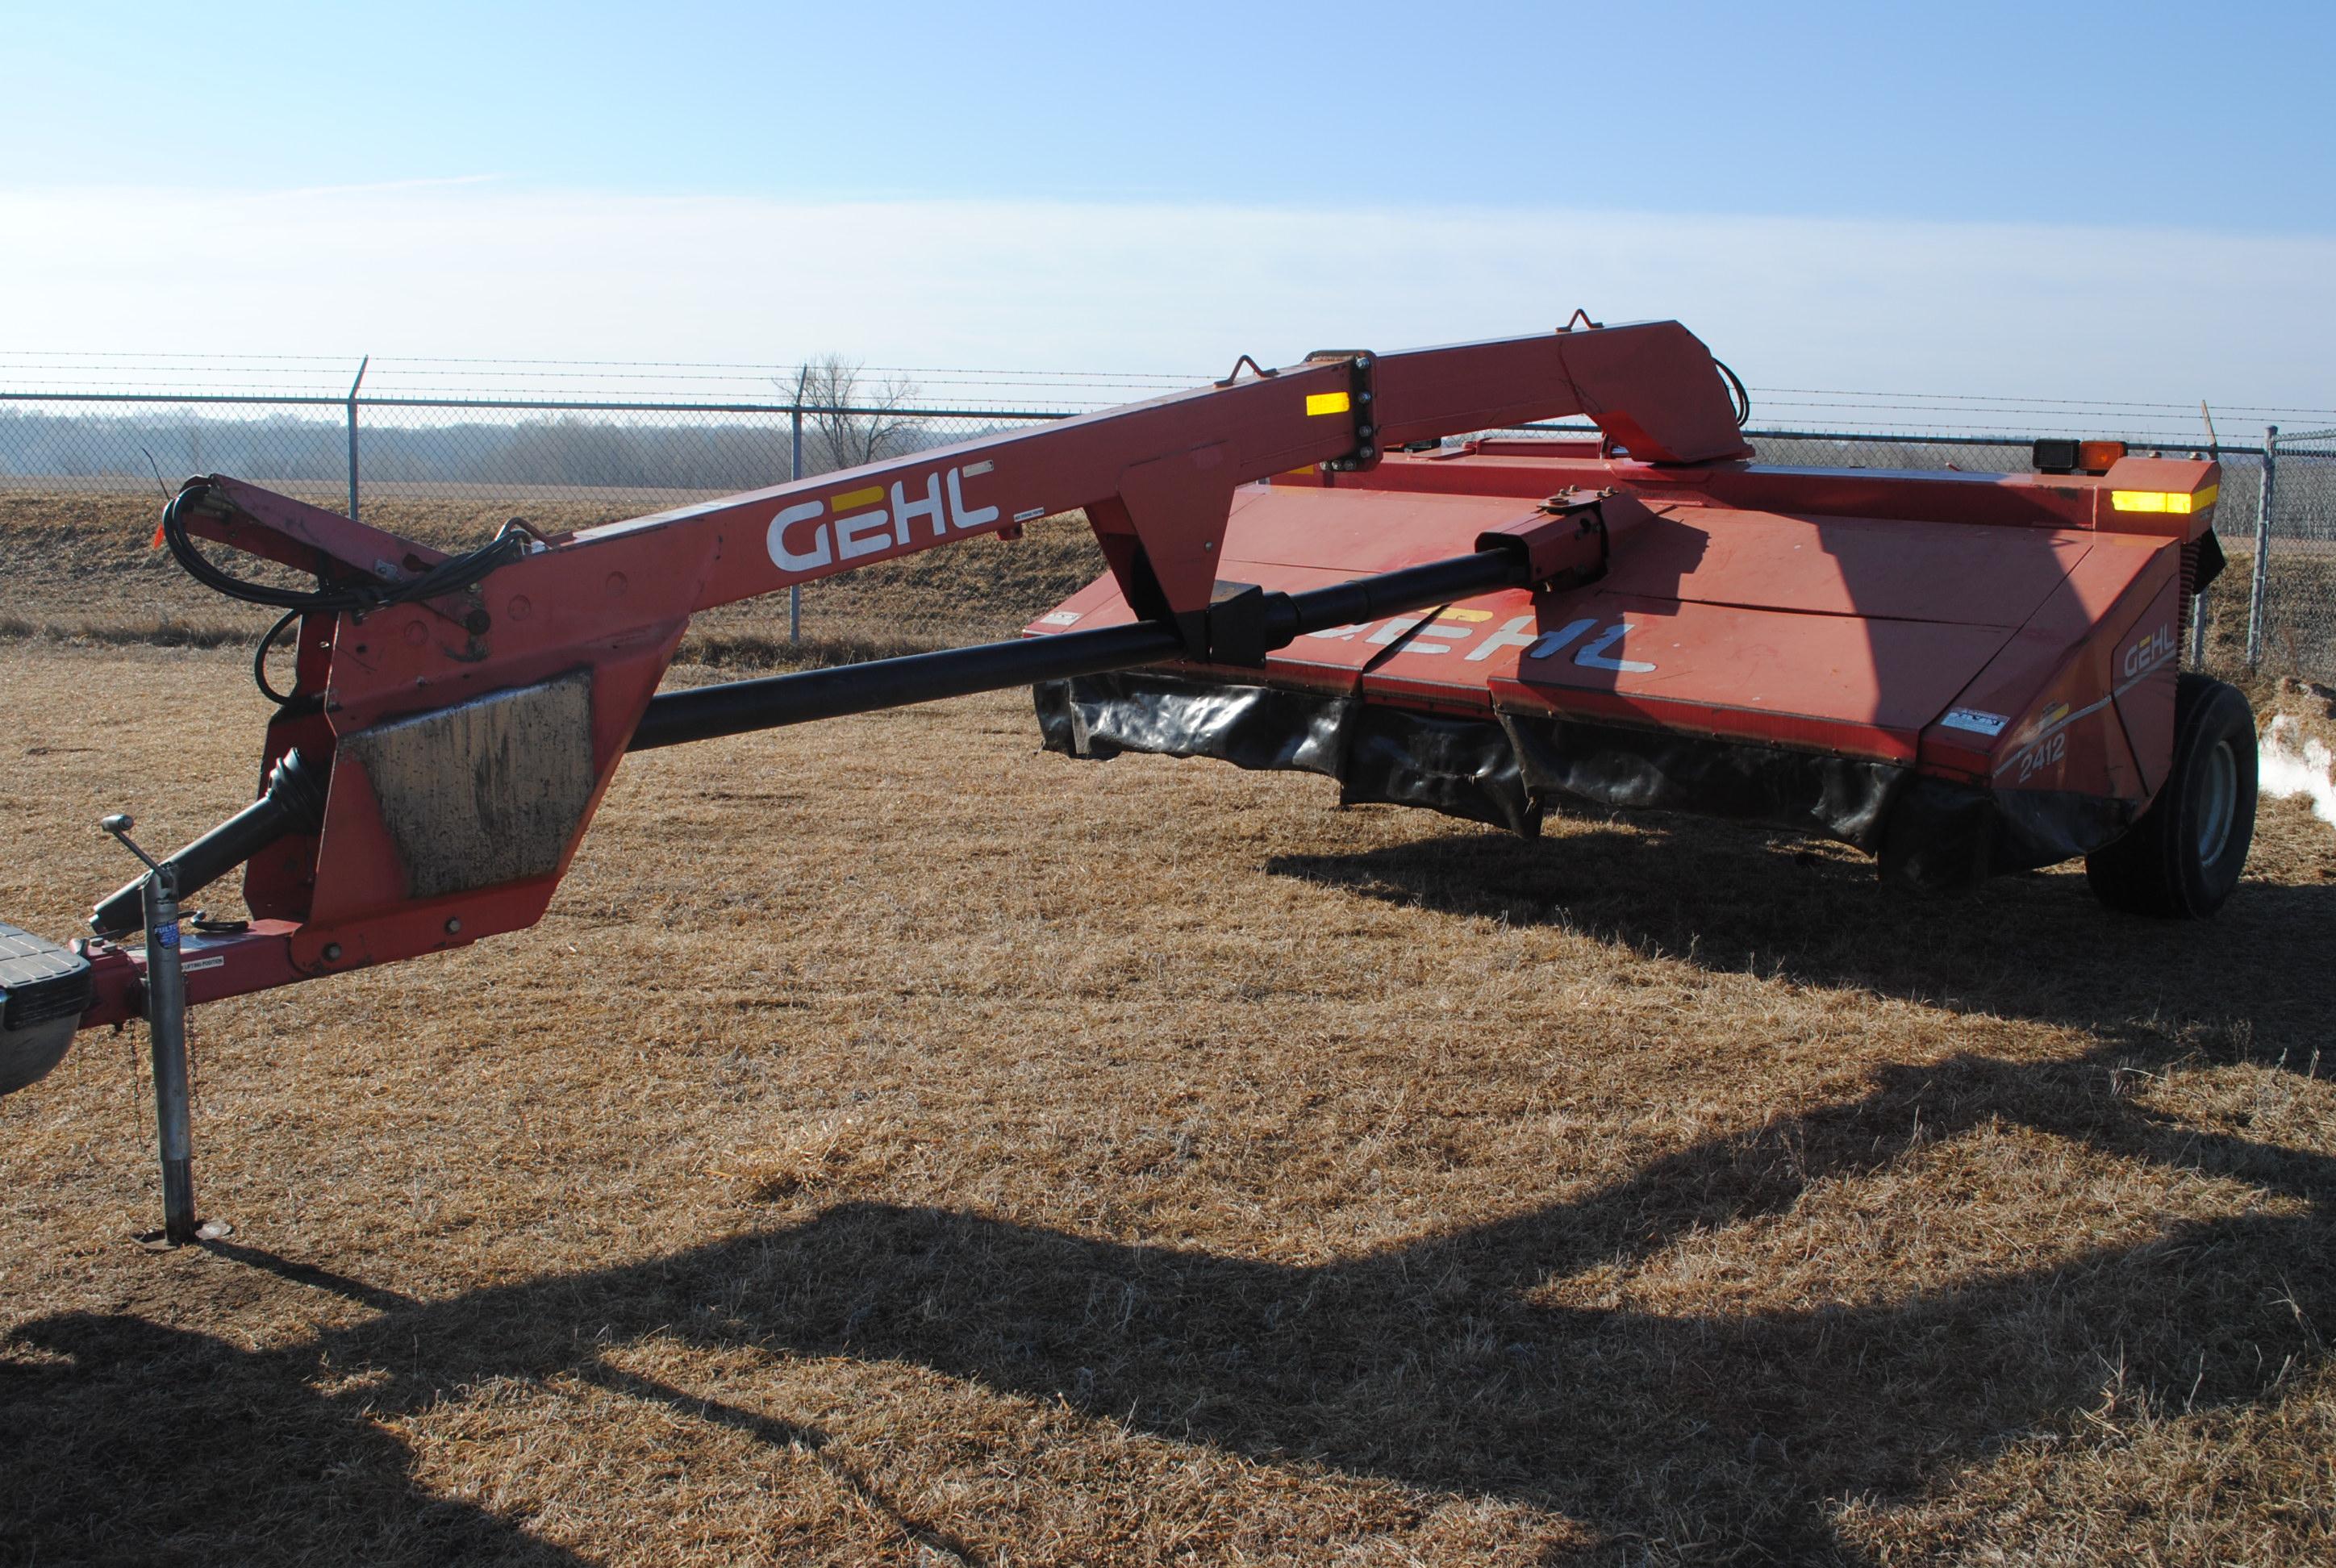 Gehl 2412 HydroSwing Disc Bine, rubber rollers, new knives, pto in office, good-running condition